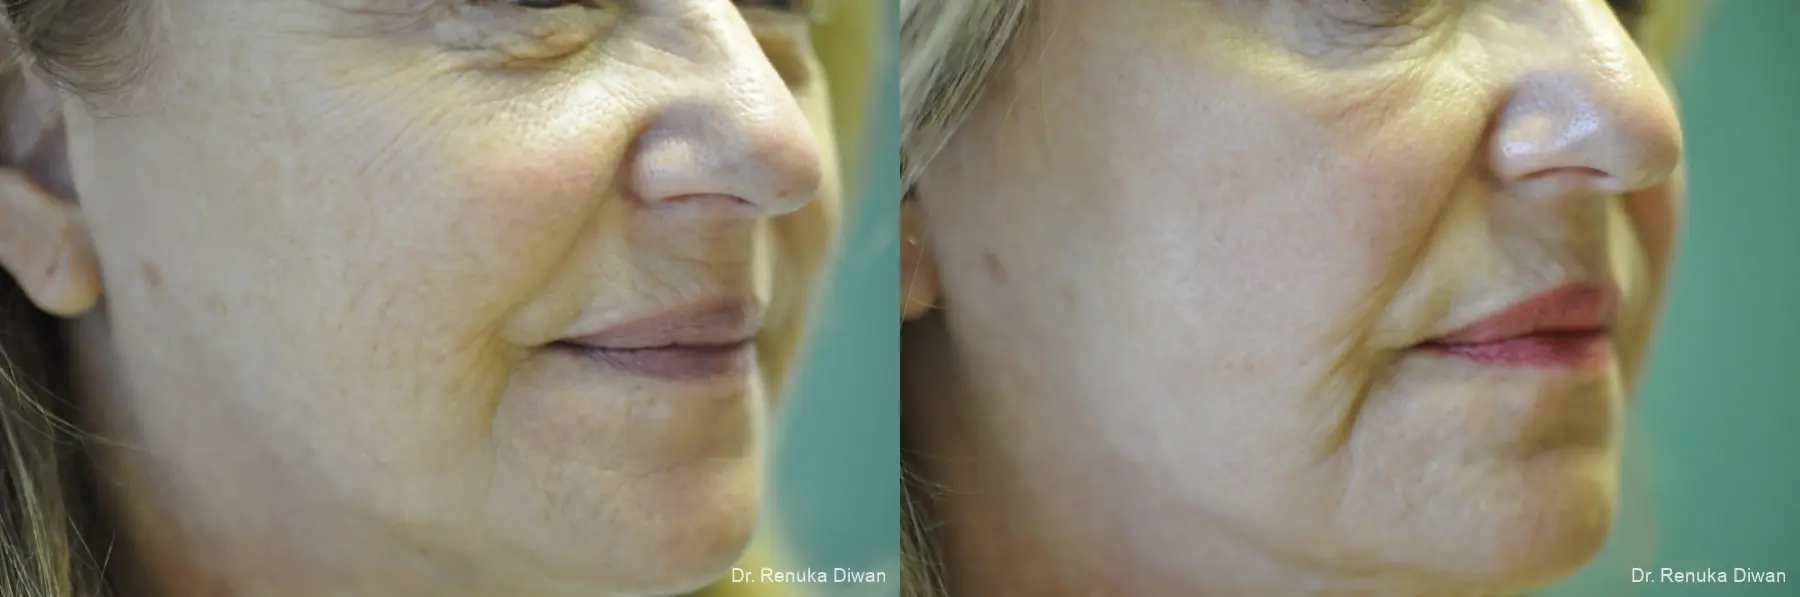 Laser Skin Resurfacing: Patient 11 - Before and After 3